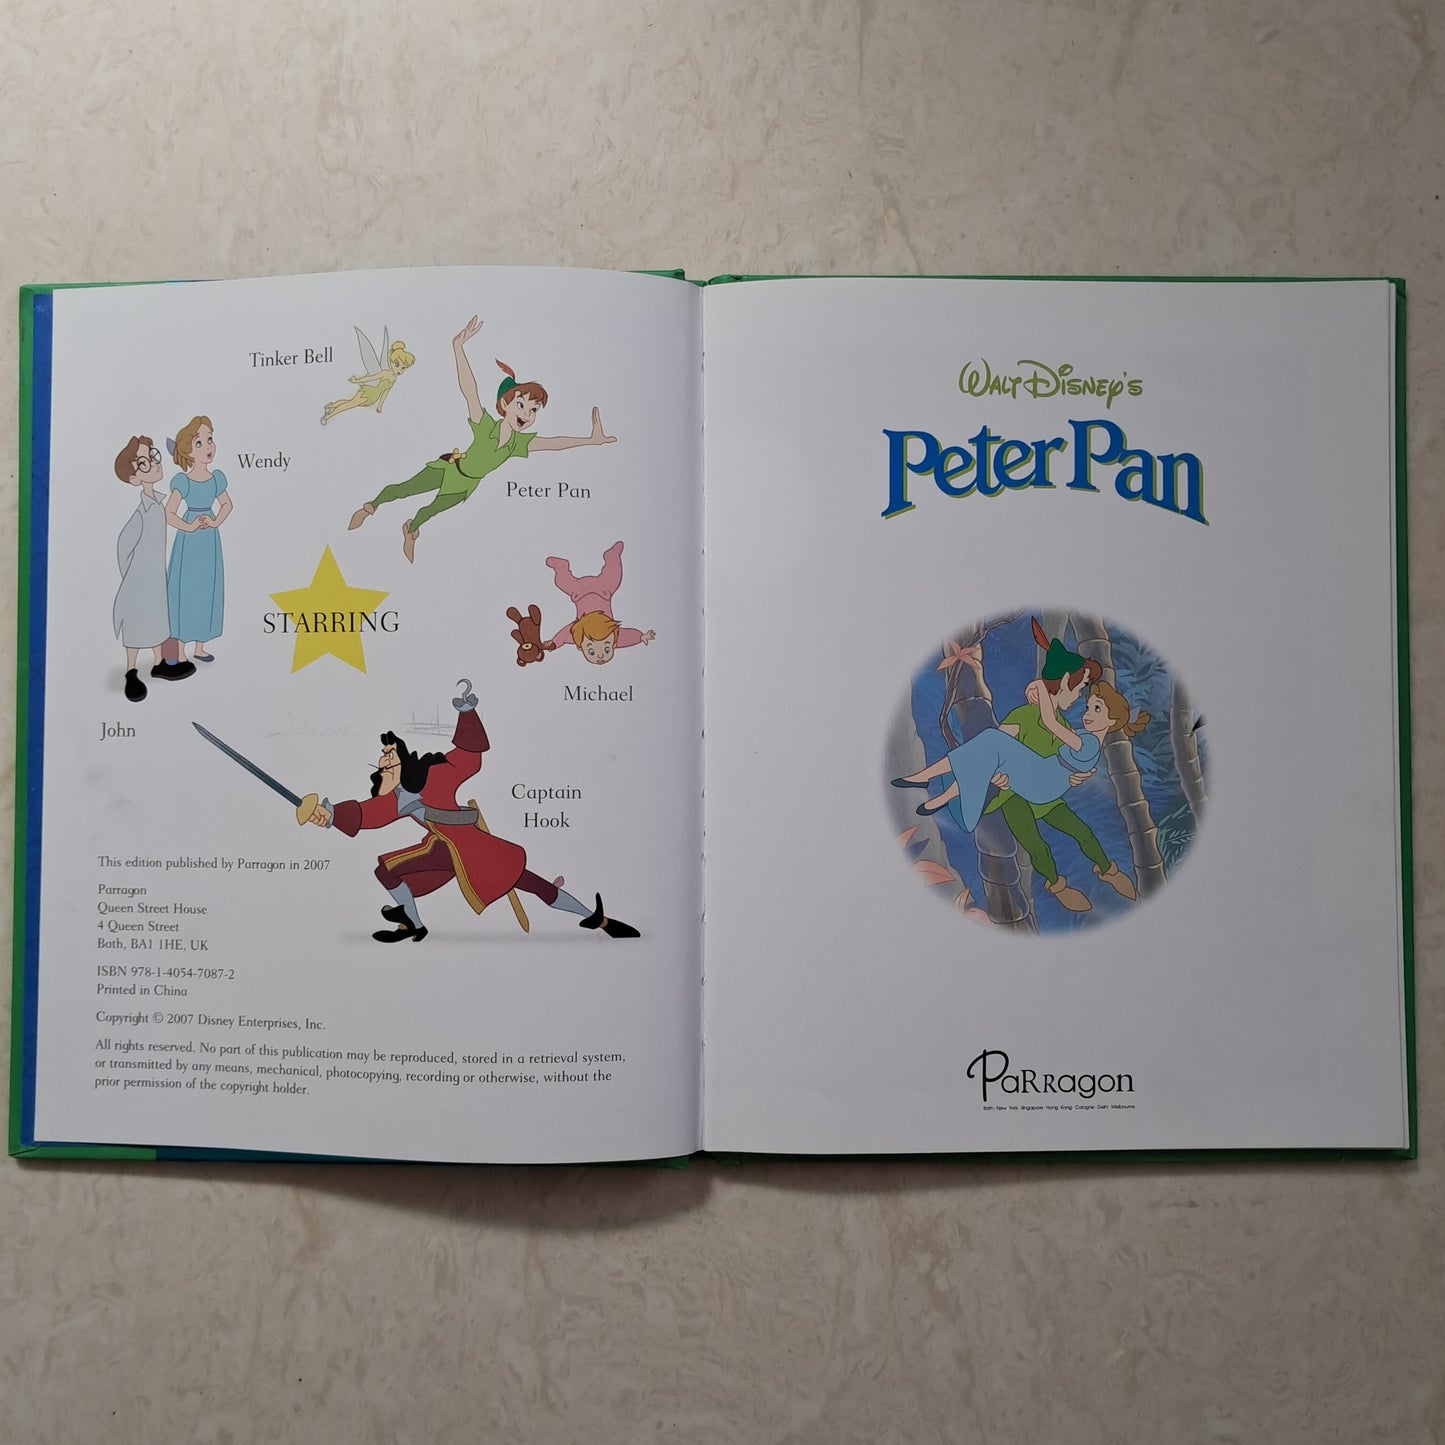 Peter Pan The magical story of the Disney movie